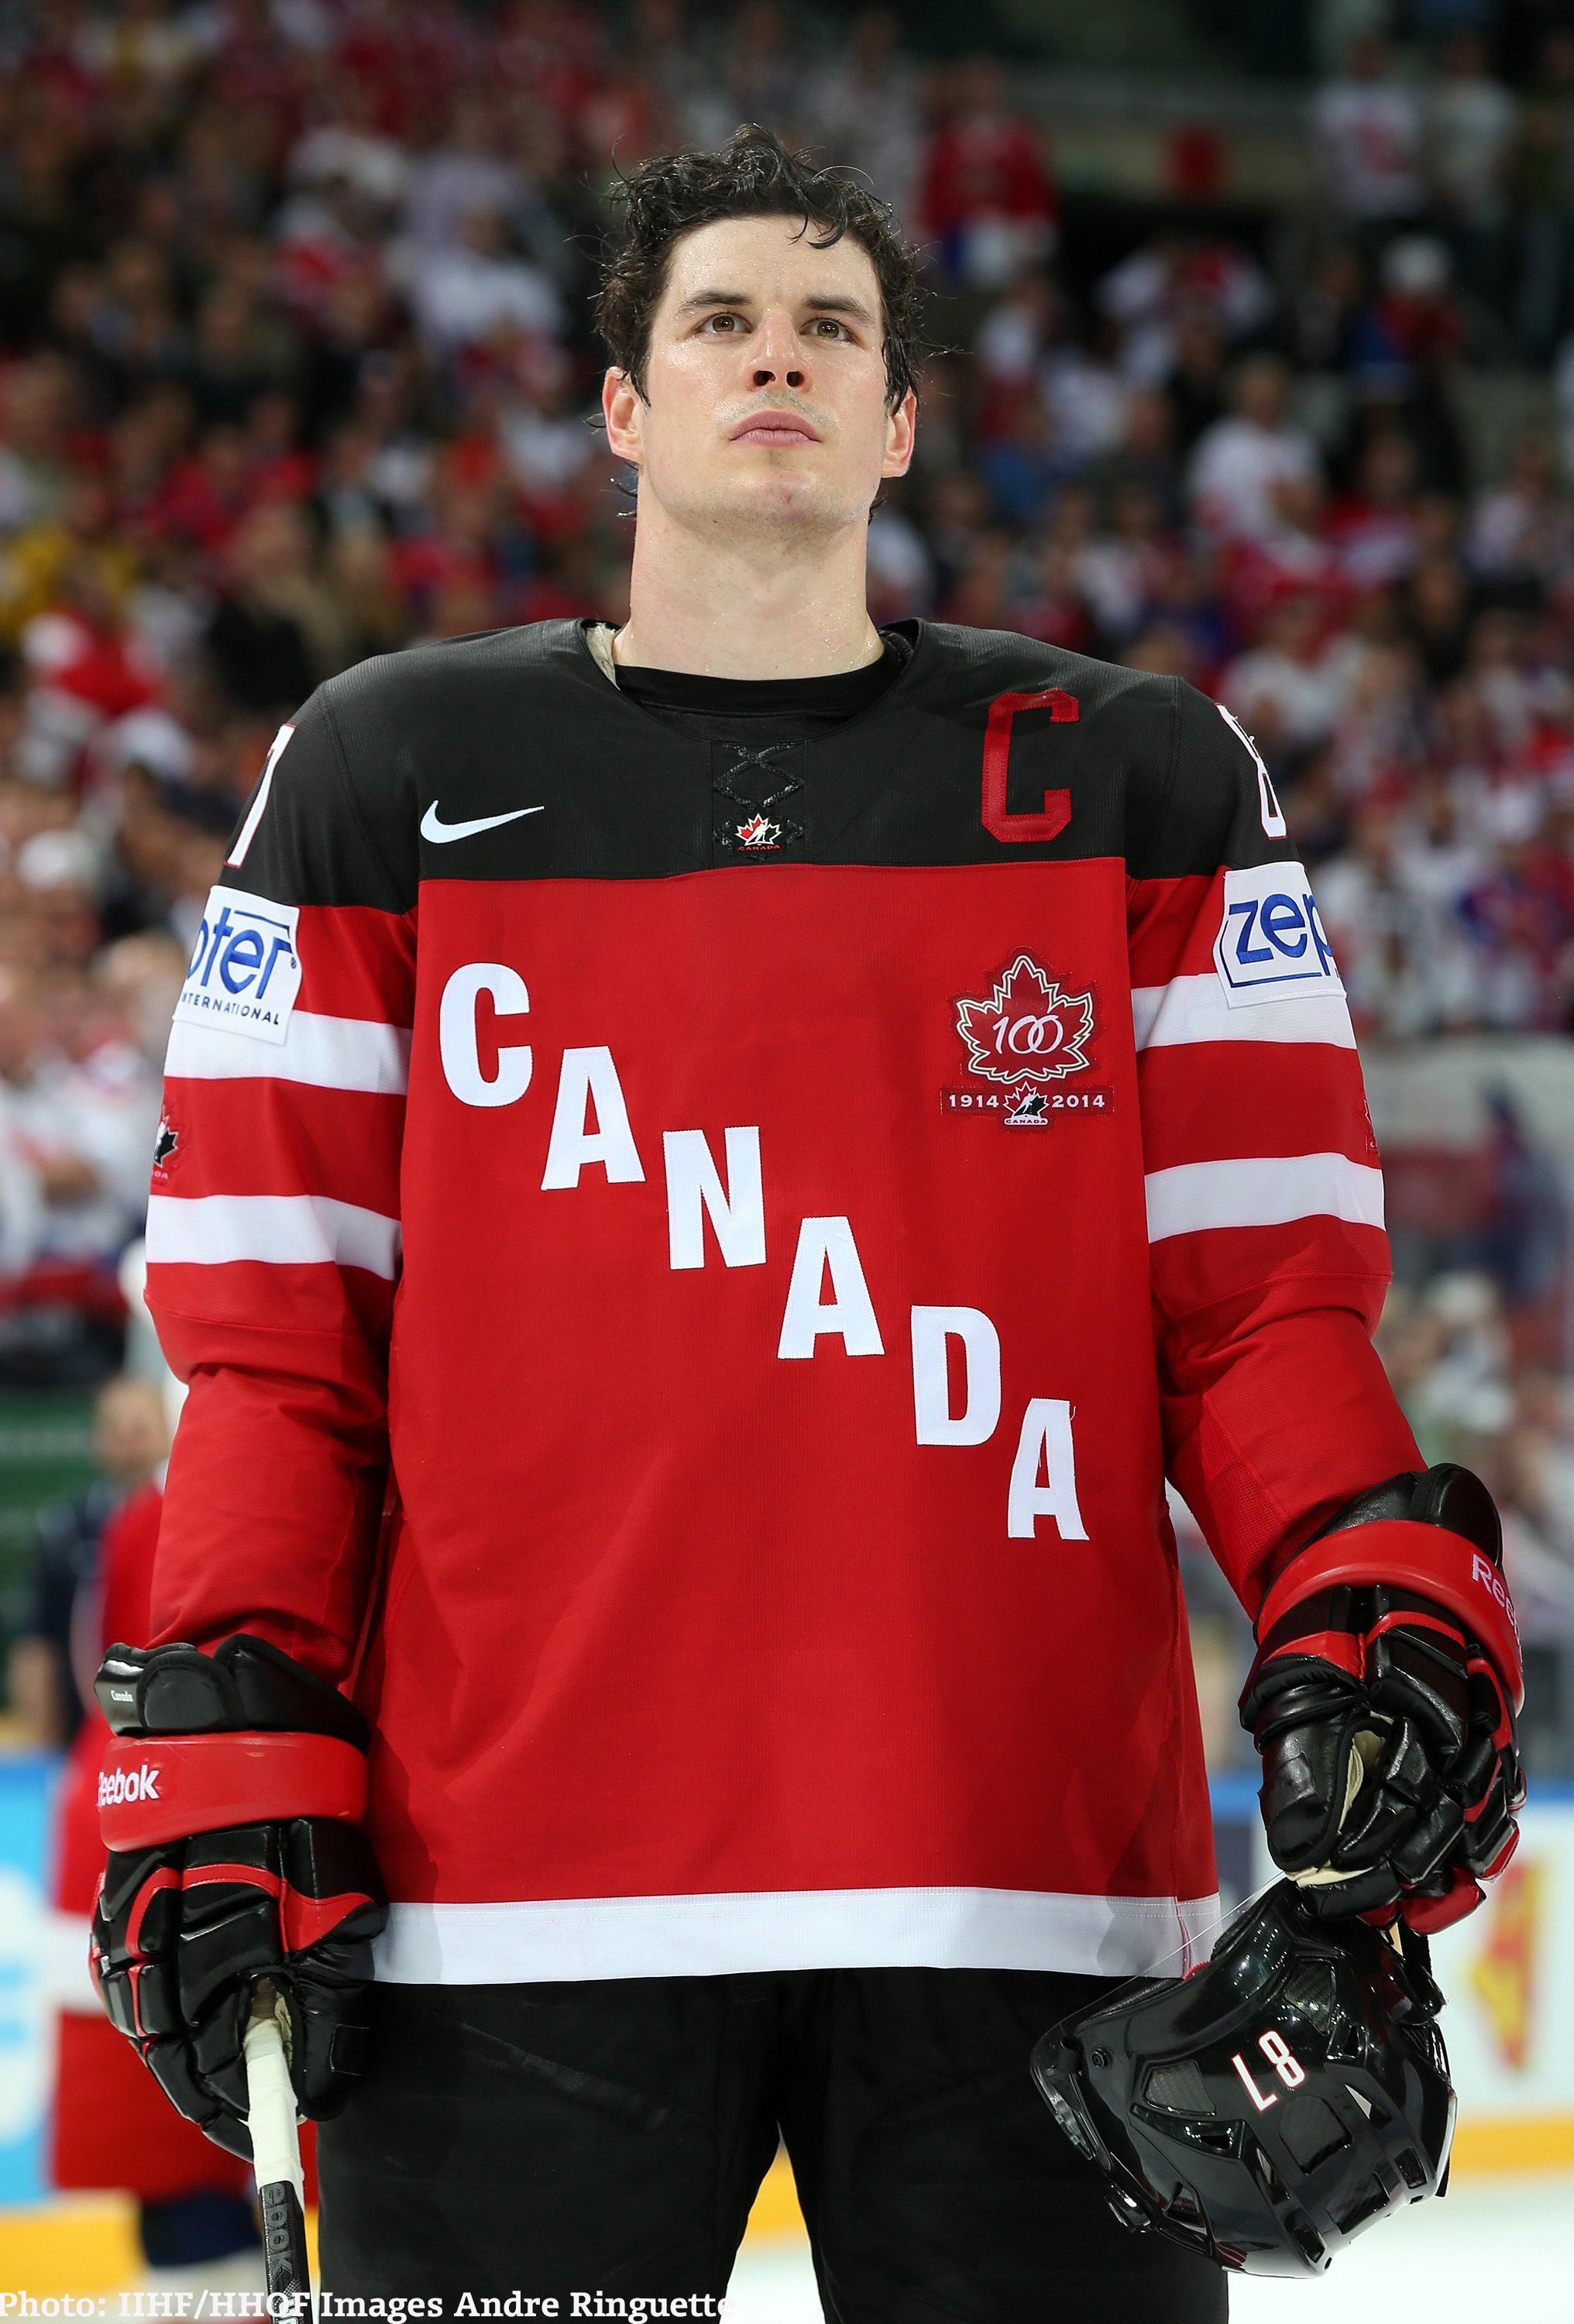 My Hockey World — sportingnewsarchive: Sidney Crosby poses for a